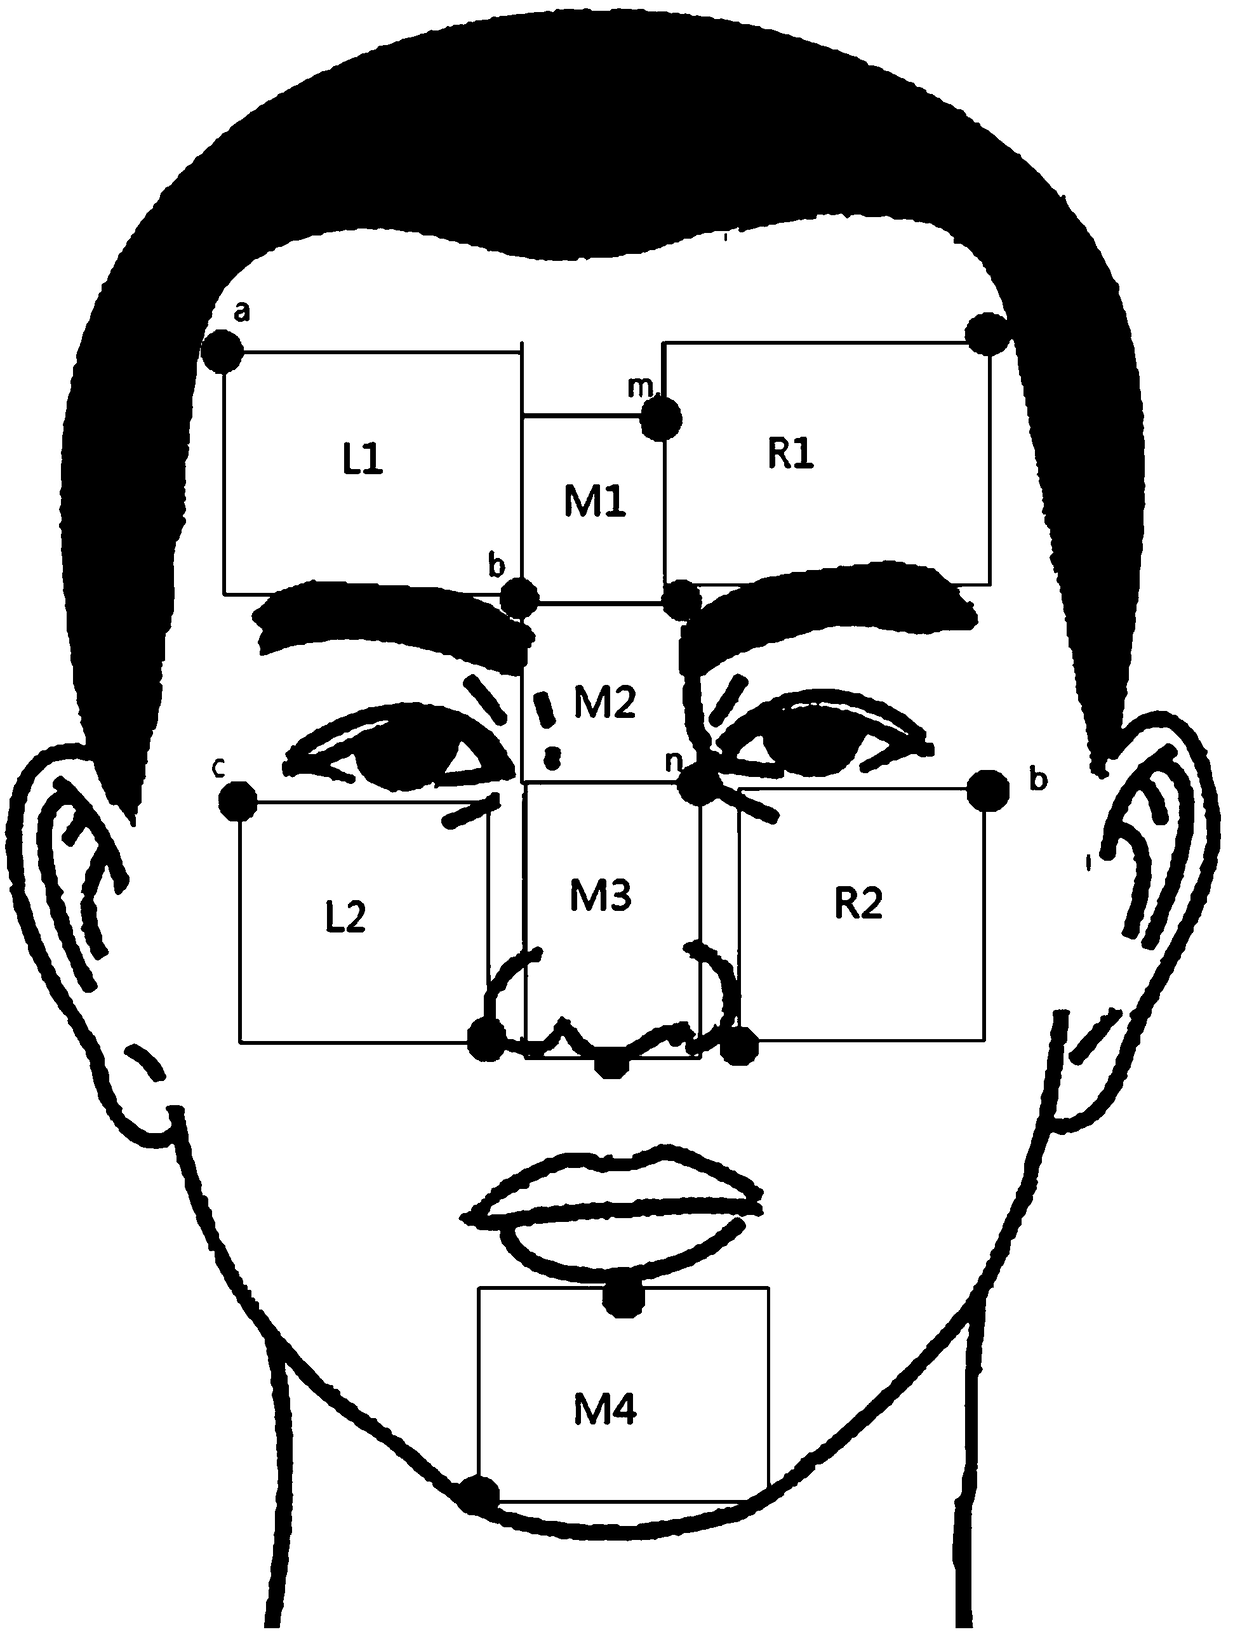 A Quantitative Skin Quality Detection Method Based on Face Image Recognition